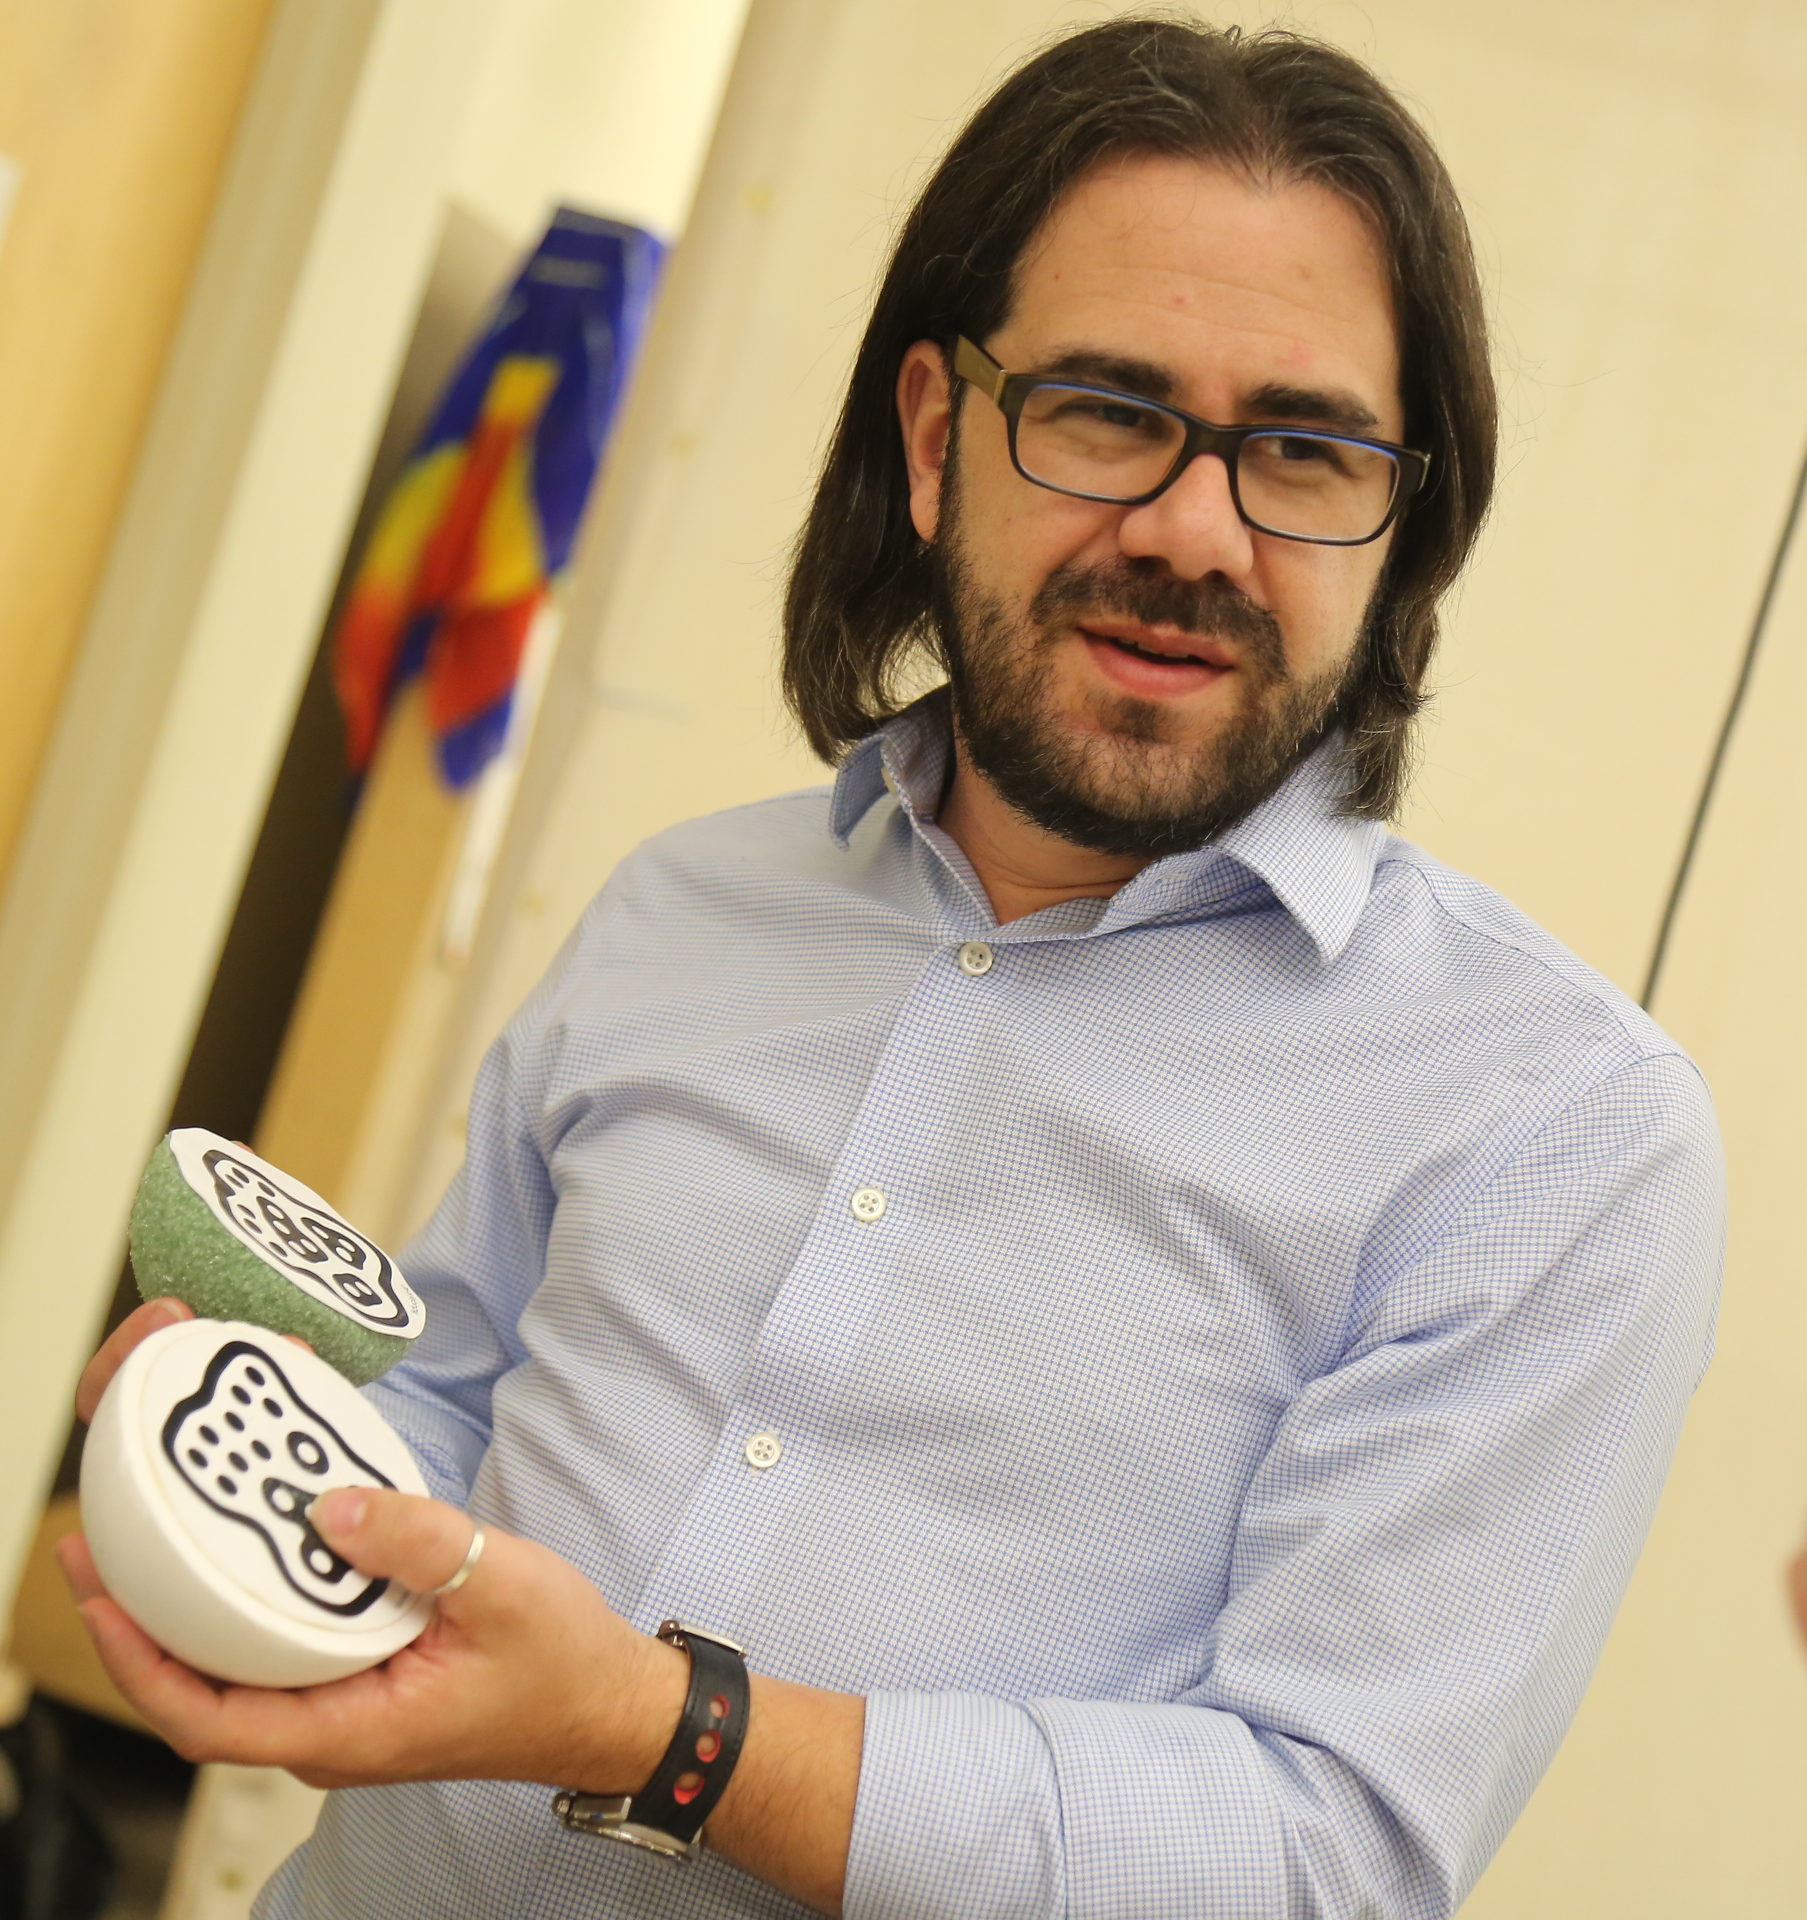 An image of Ian Bogost holding two objects, one green and one white.